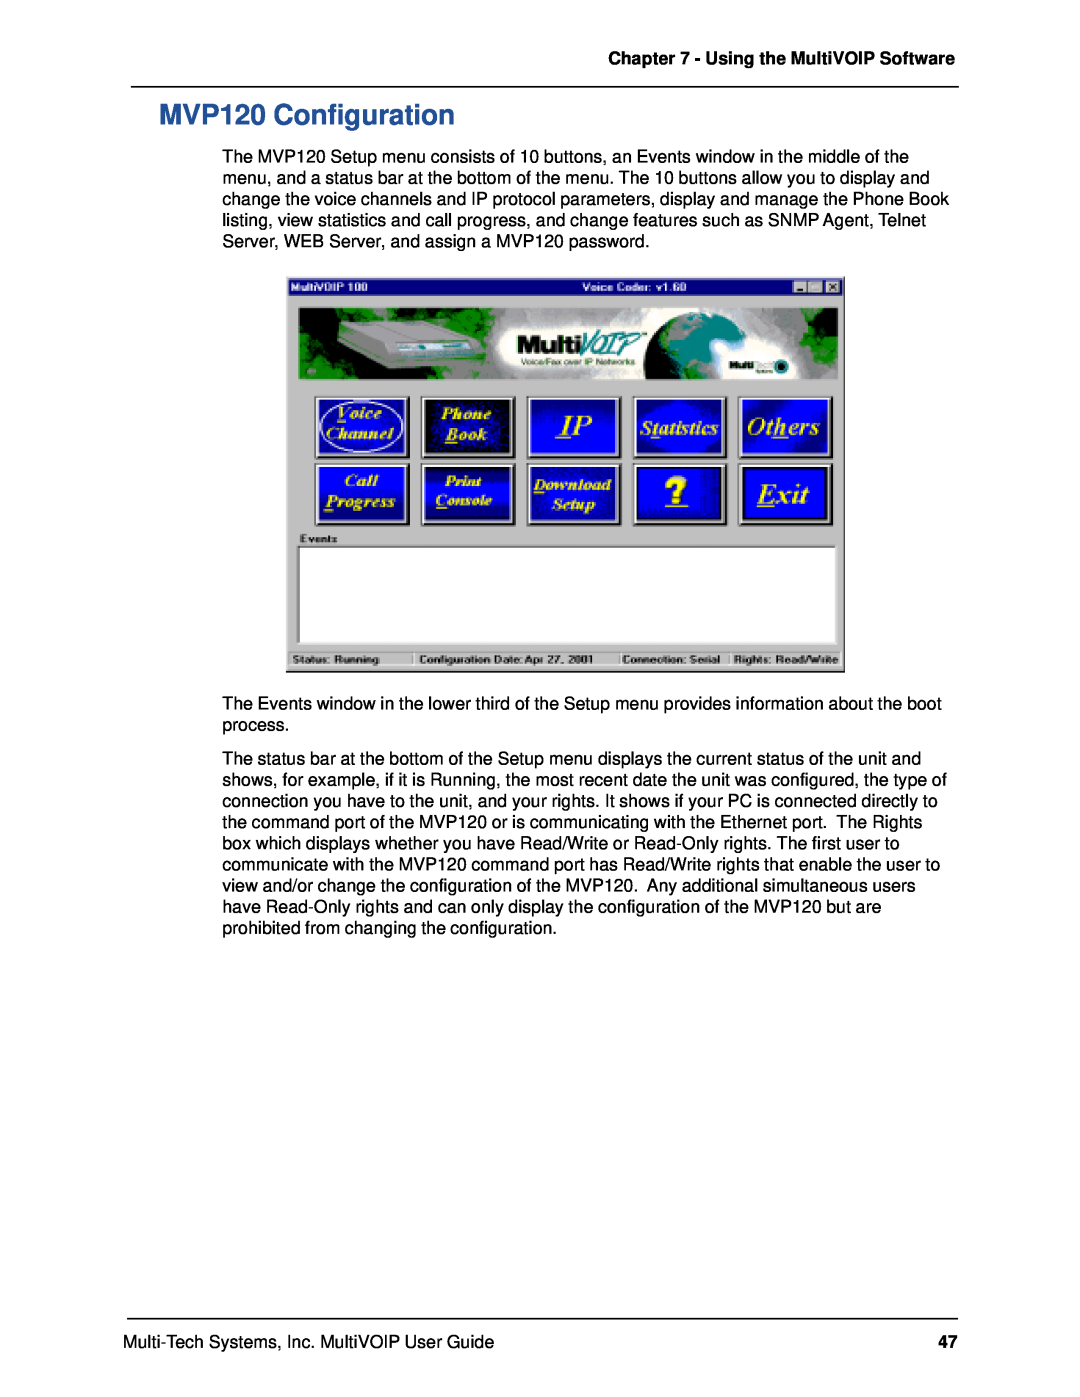 Multi-Tech Systems manual MVP120 Configuration, Using the MultiVOIP Software 